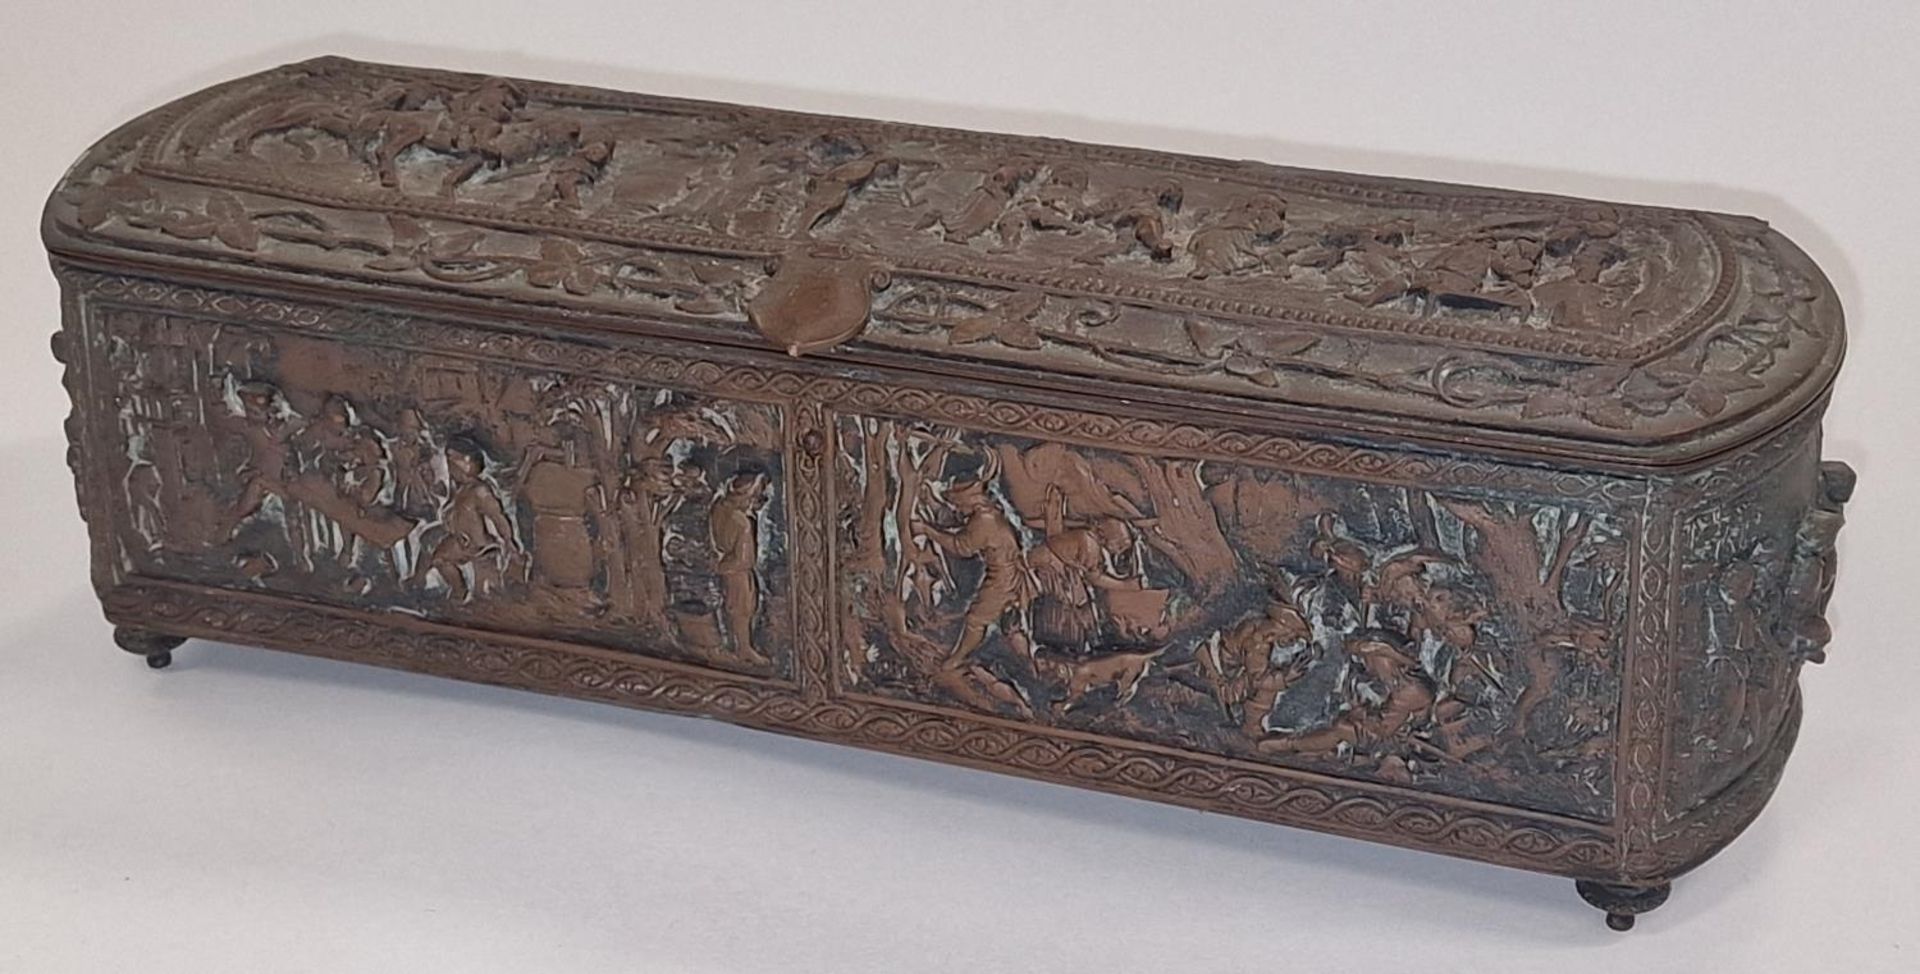 Antique French carved copper box.